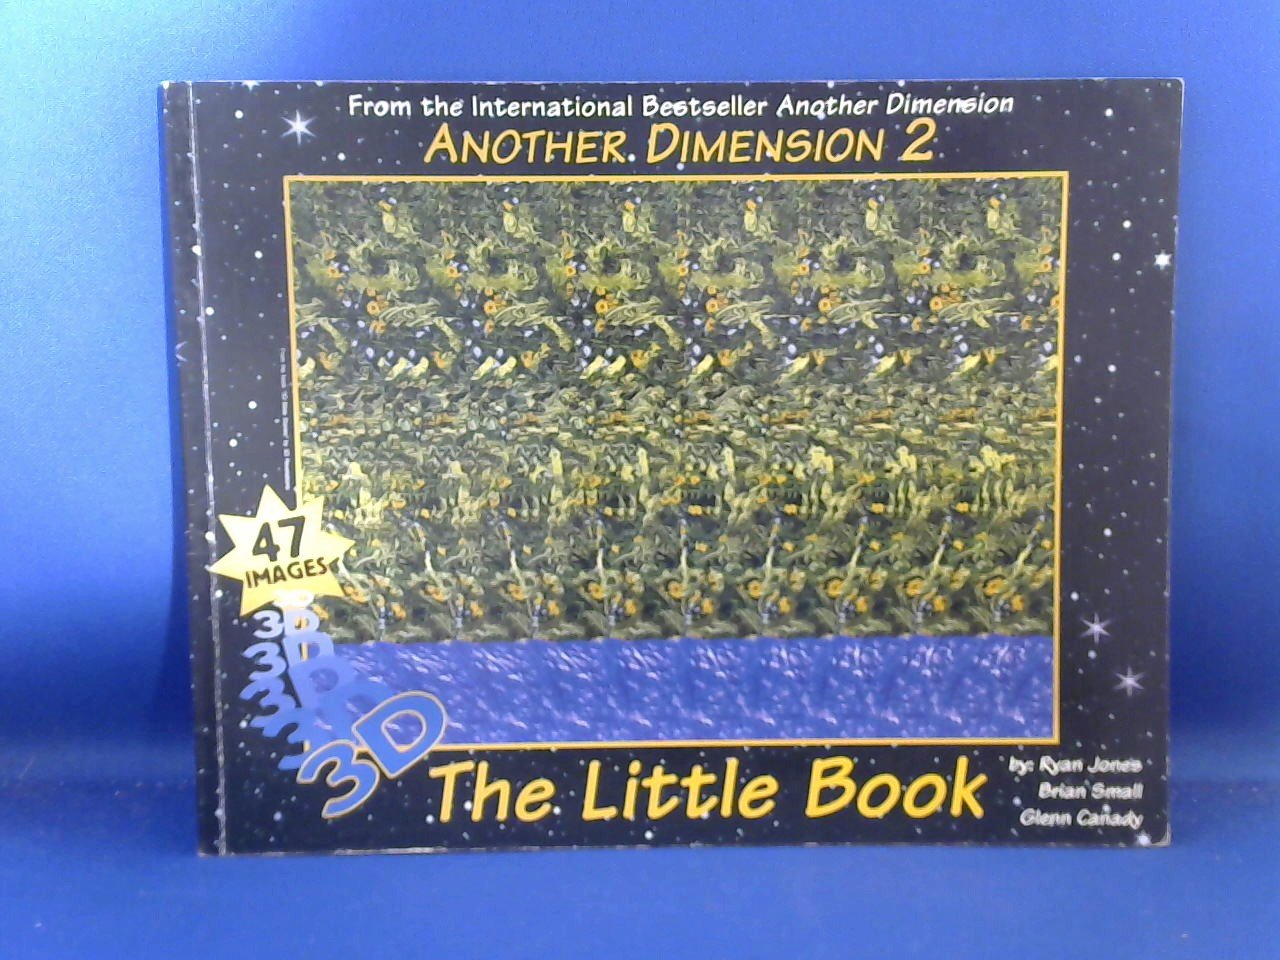 JONES R./SMALL B./CANADY G. - Another Dimension 2. The little book. 47 images 3D